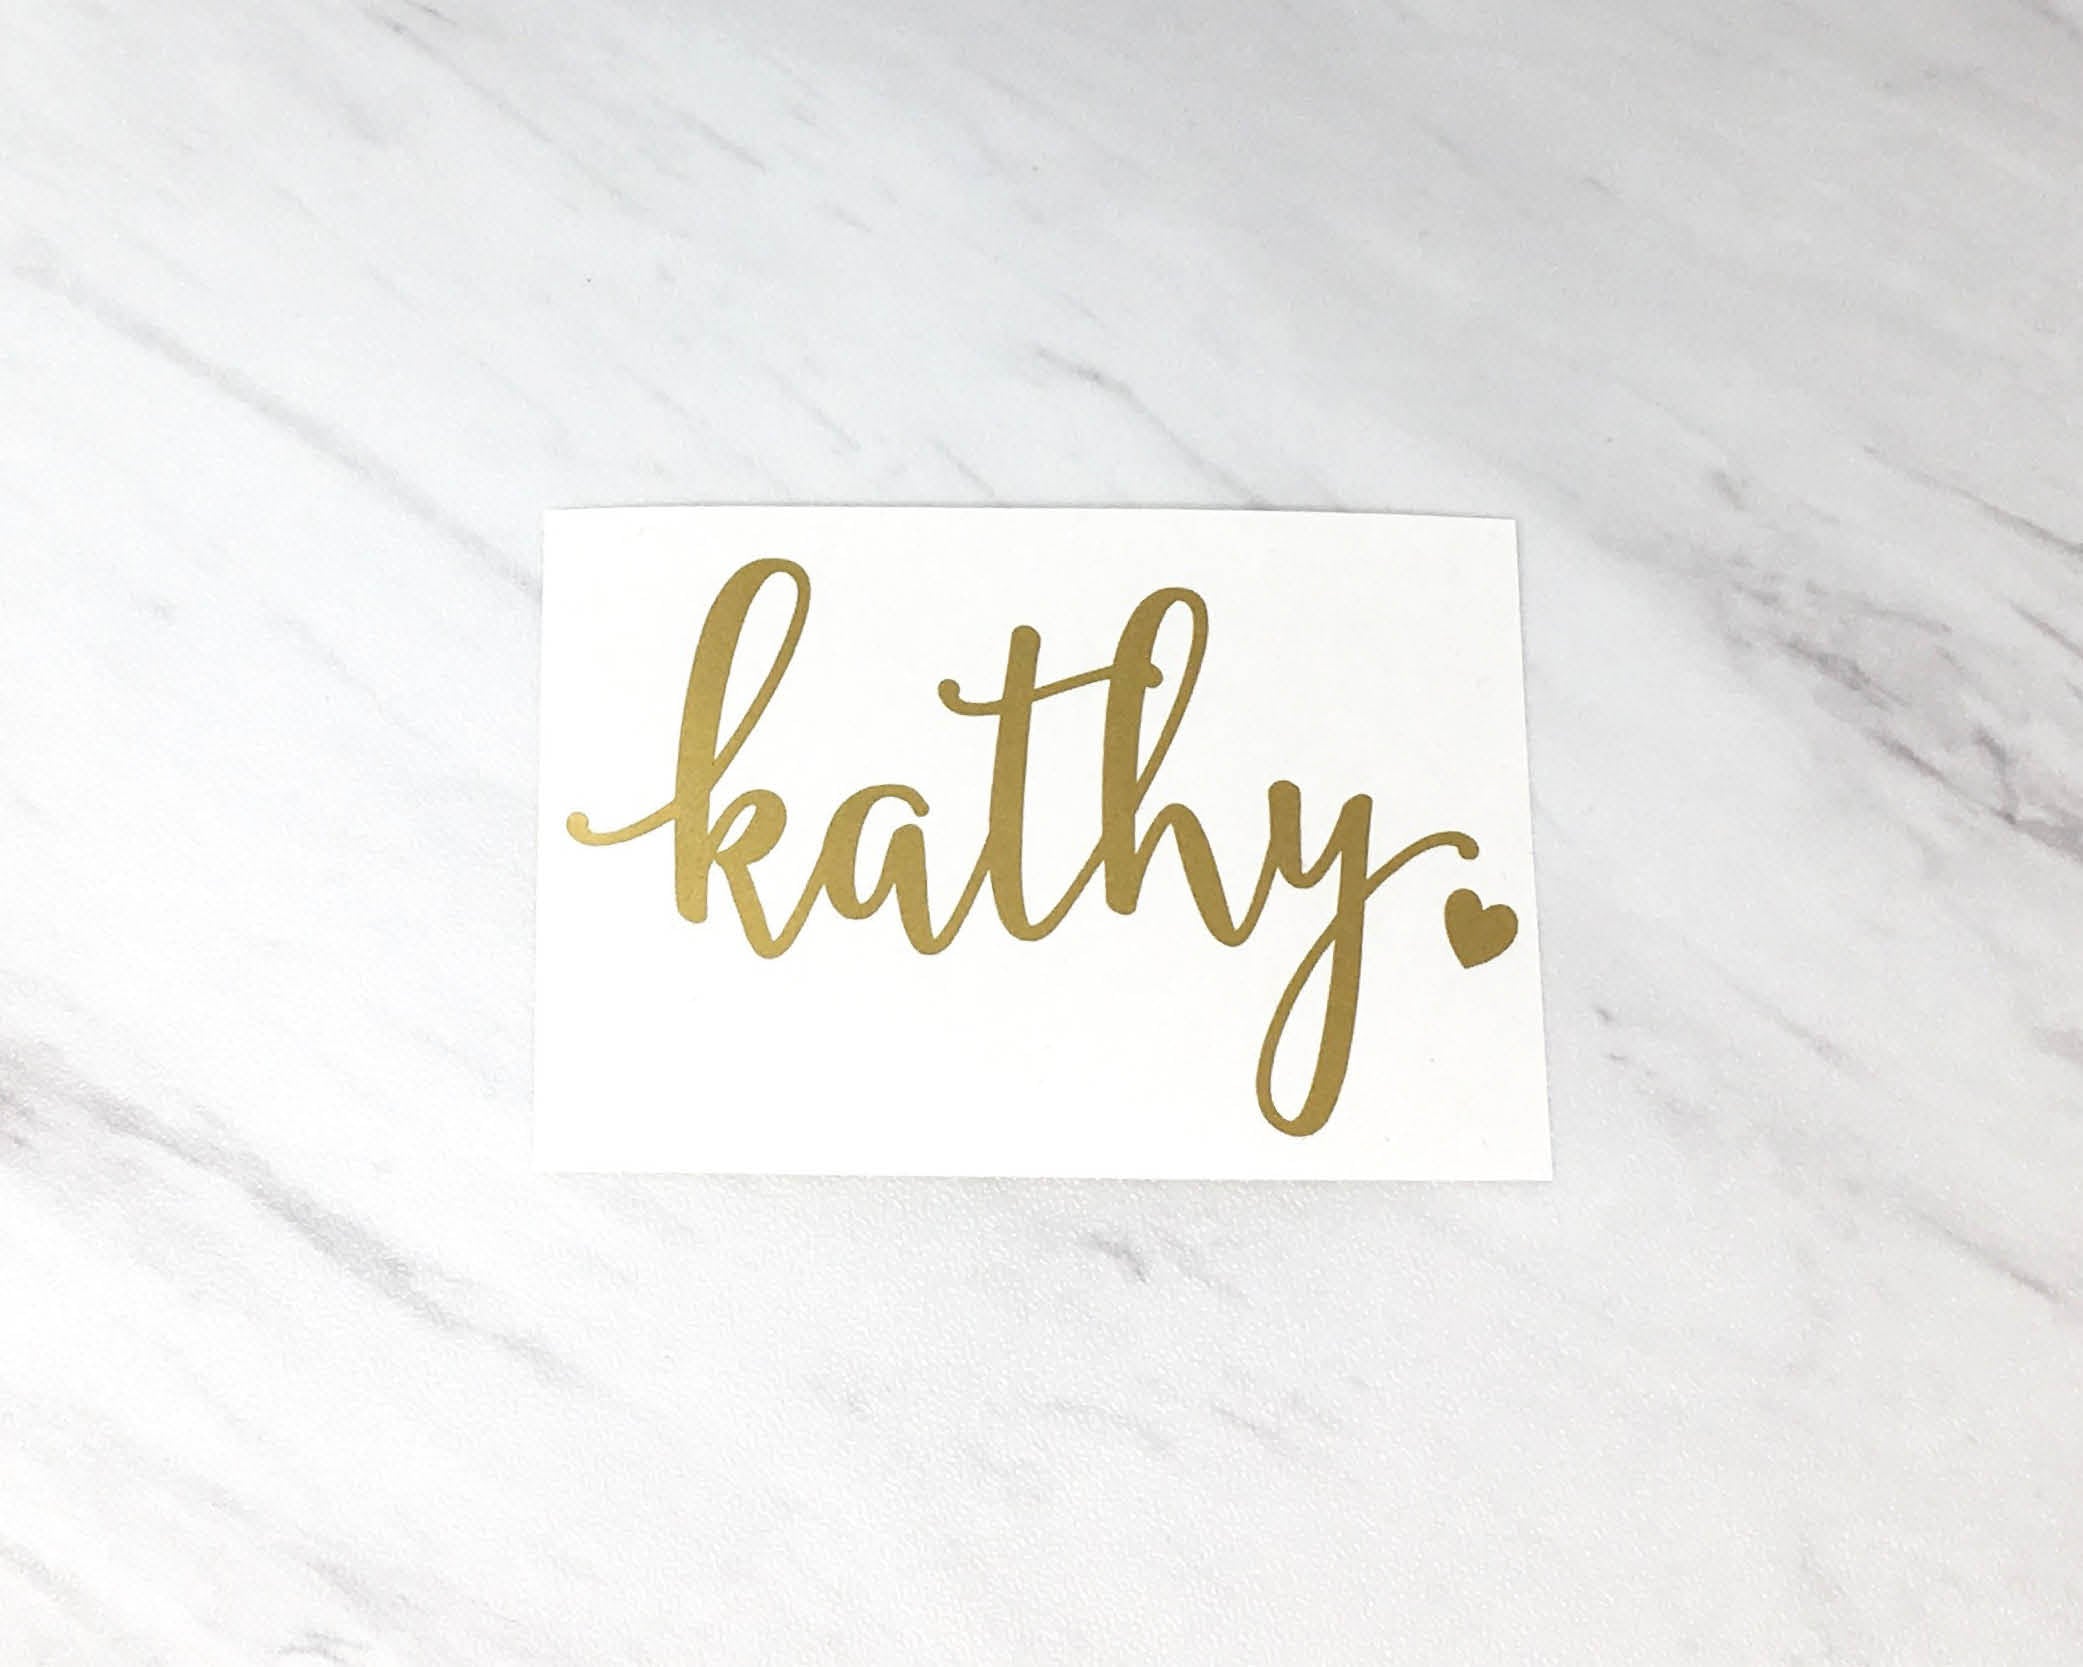 Personalized Name with Heart Vinyl Decal